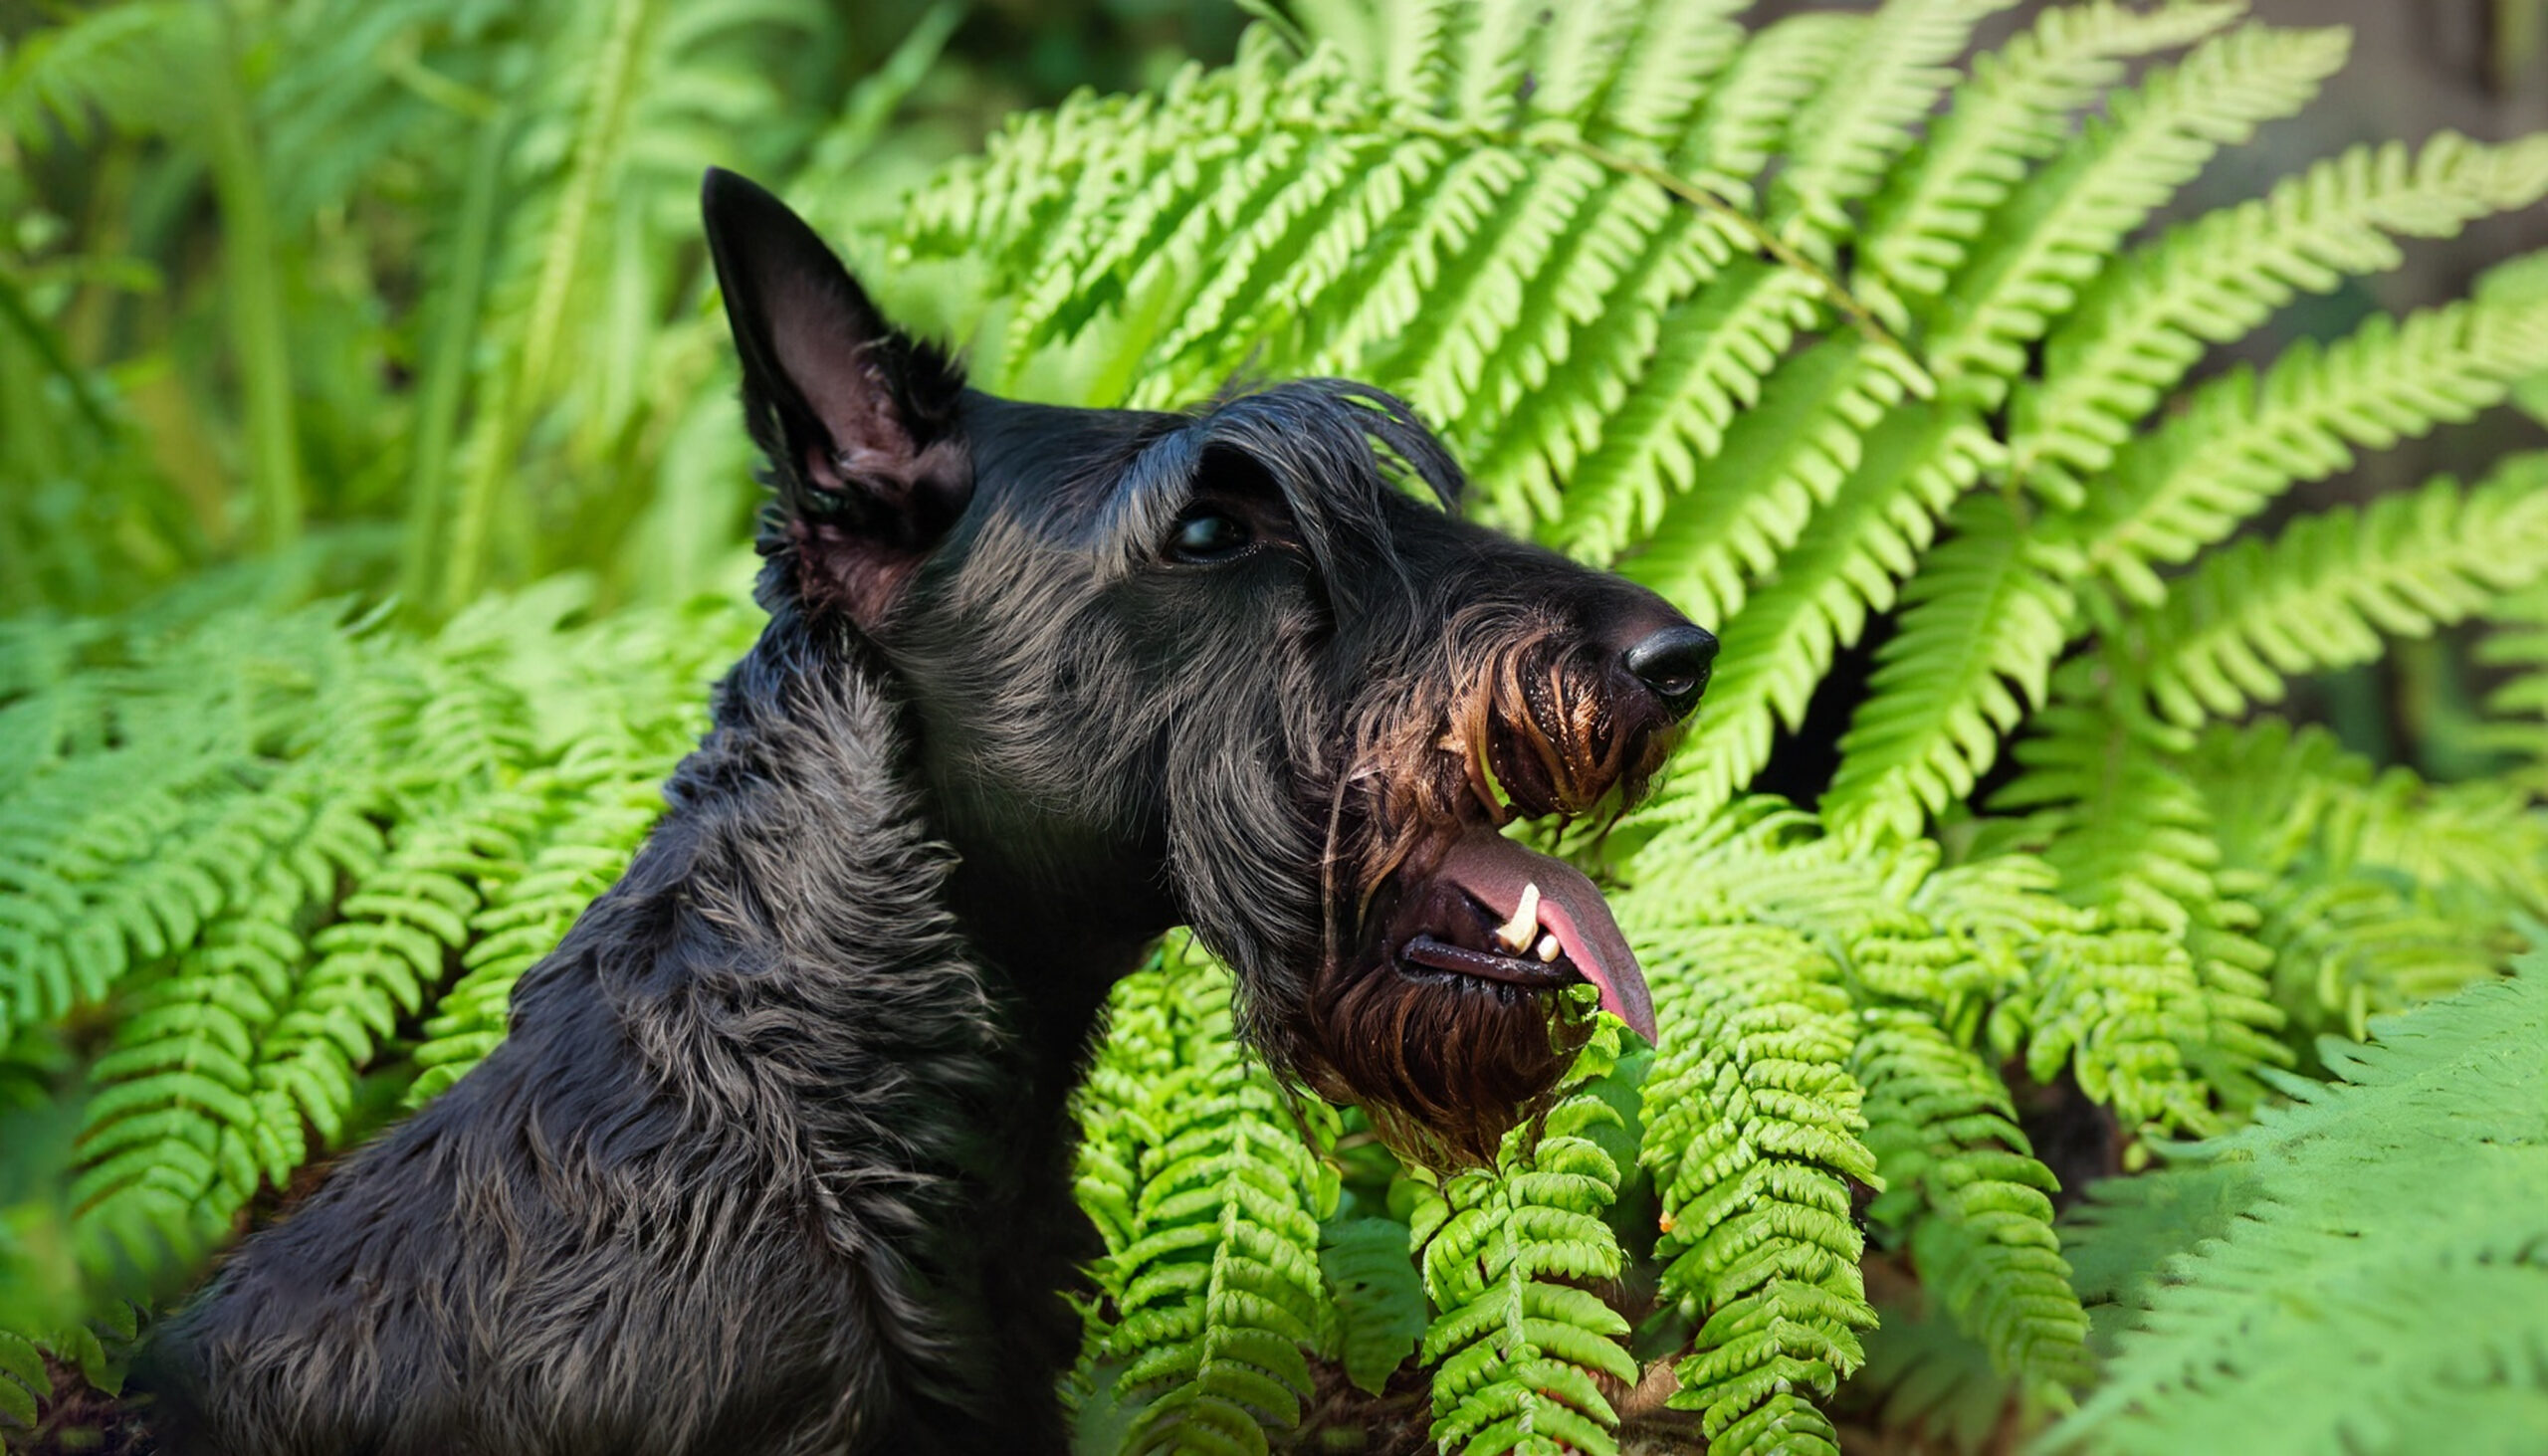 Most true ferns, such as maidenhair, ostrich, and sword, are considered non-toxic to dogs. The ASPCA suggests that they are safe for dogs to ingest if appropriately fed.